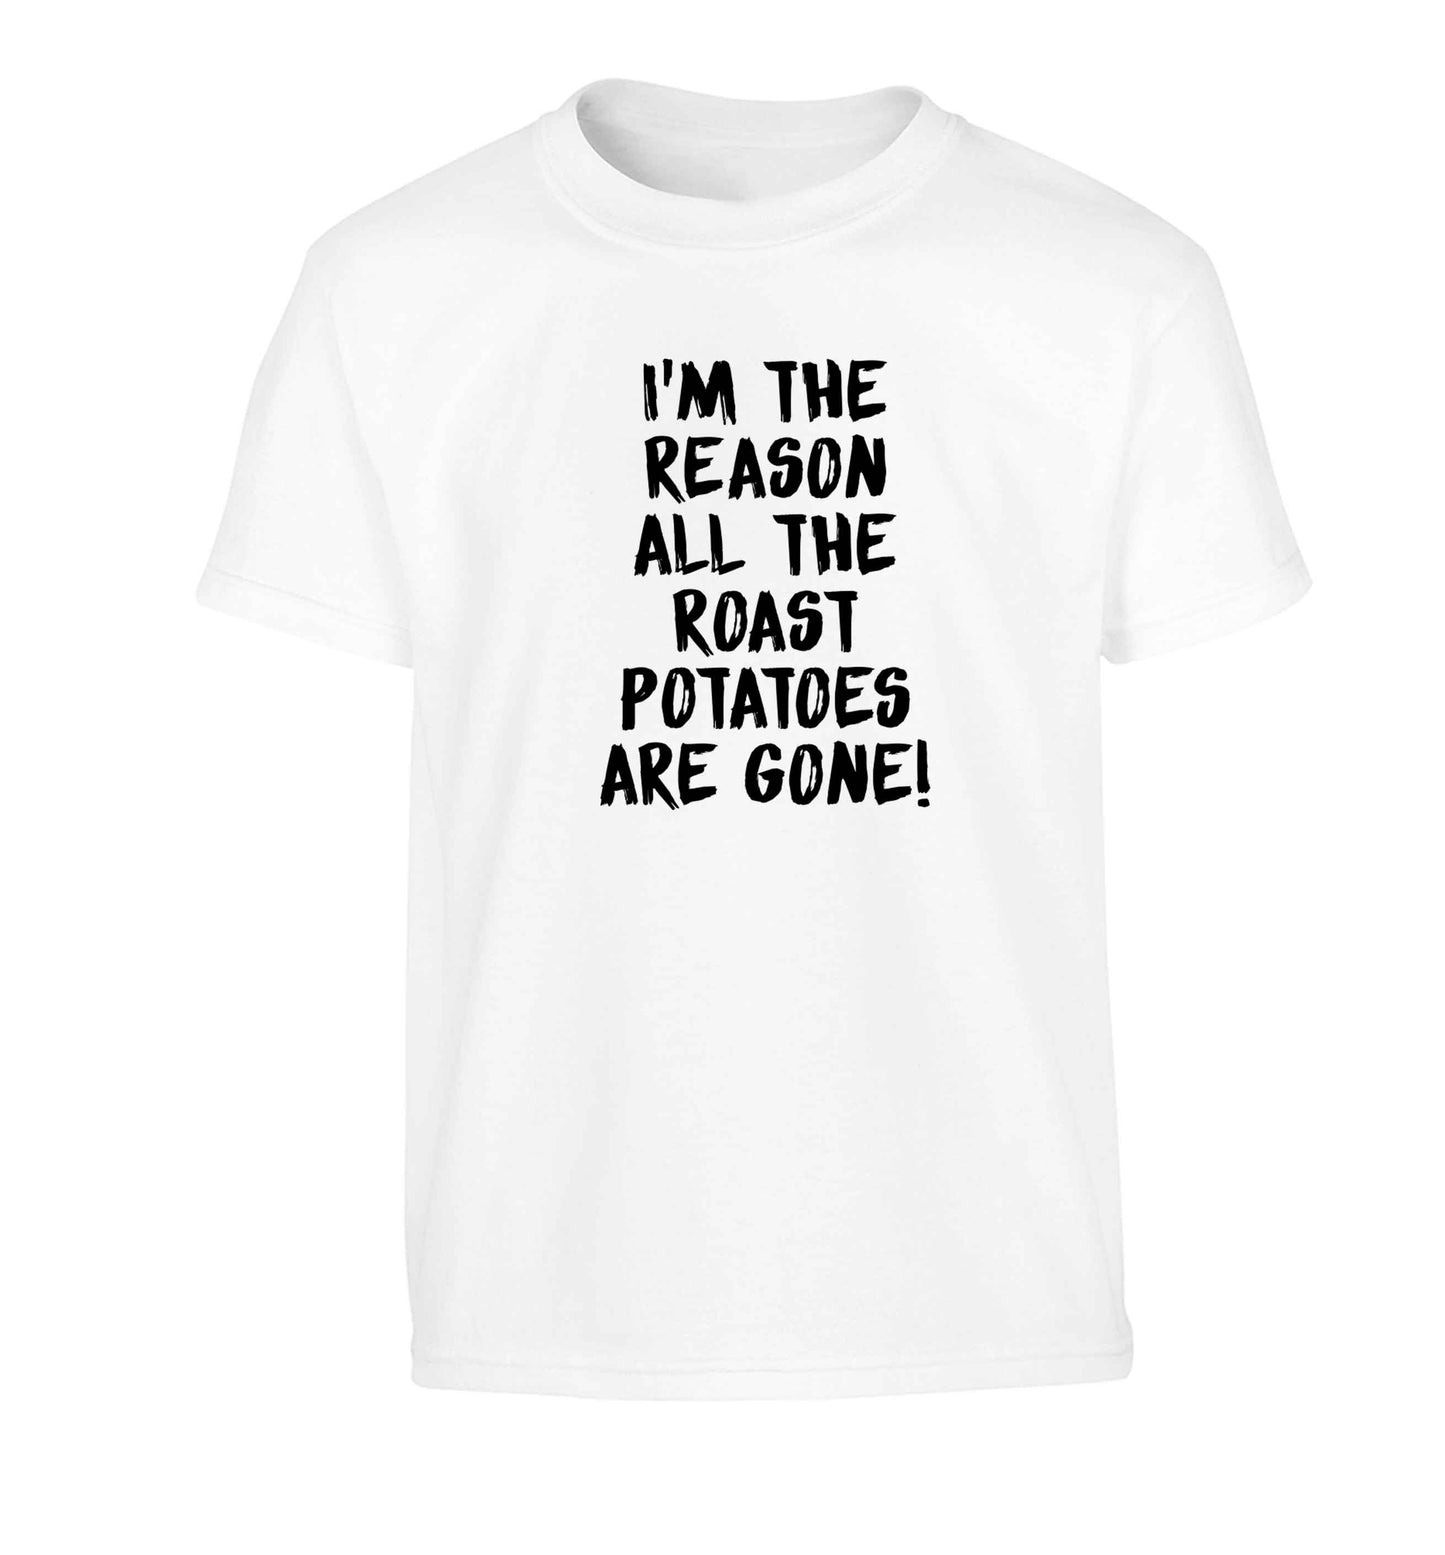 I'm the reason all the roast potatoes are gone Children's white Tshirt 12-13 Years